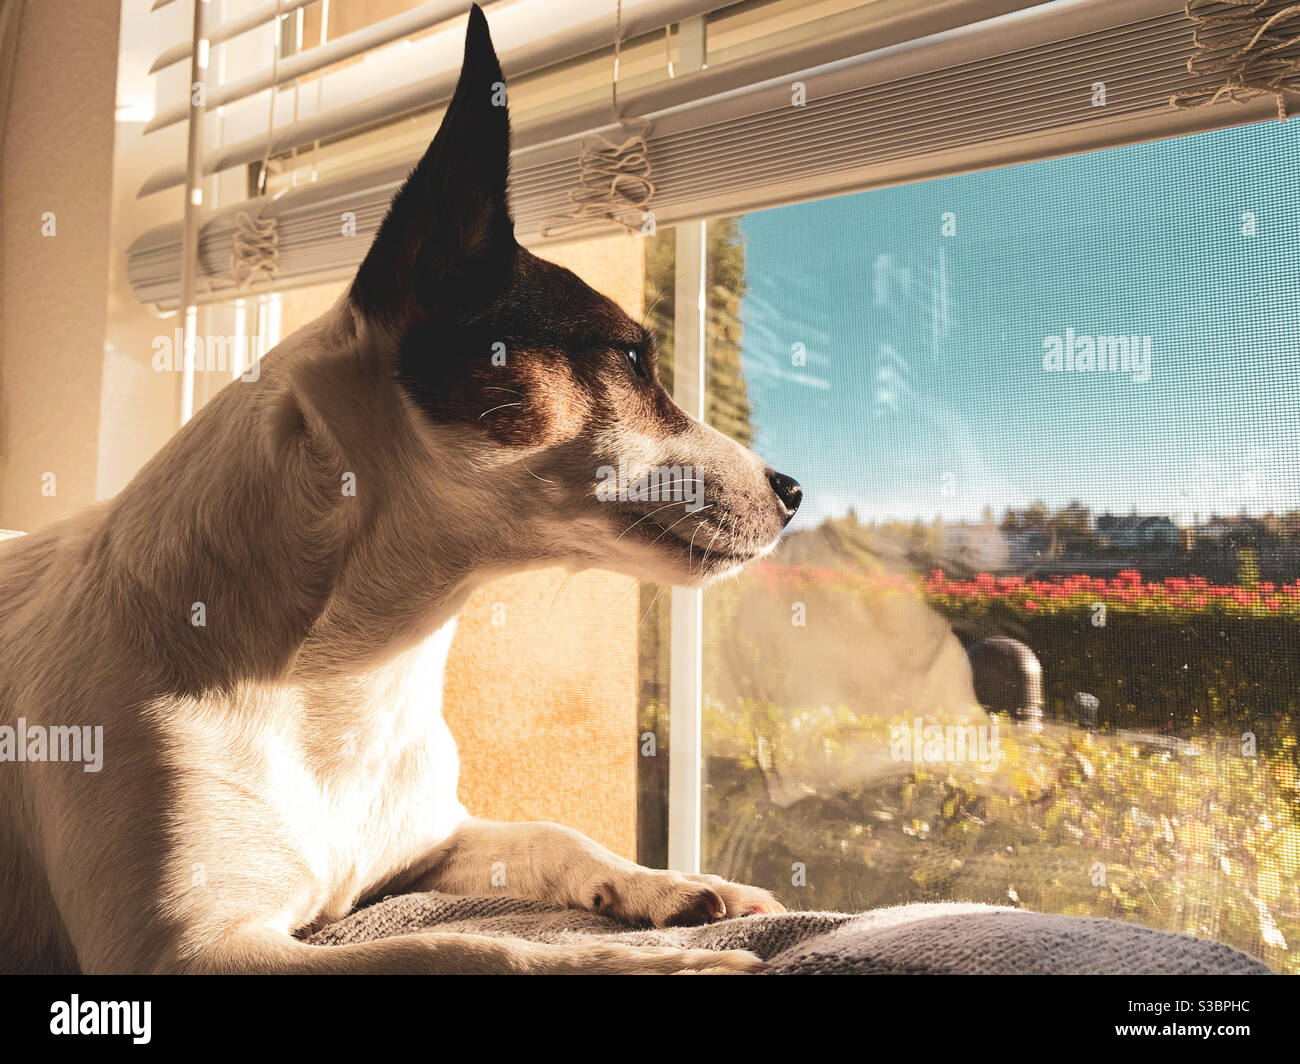 Dog looking out window on a sunny day. Stock Photo